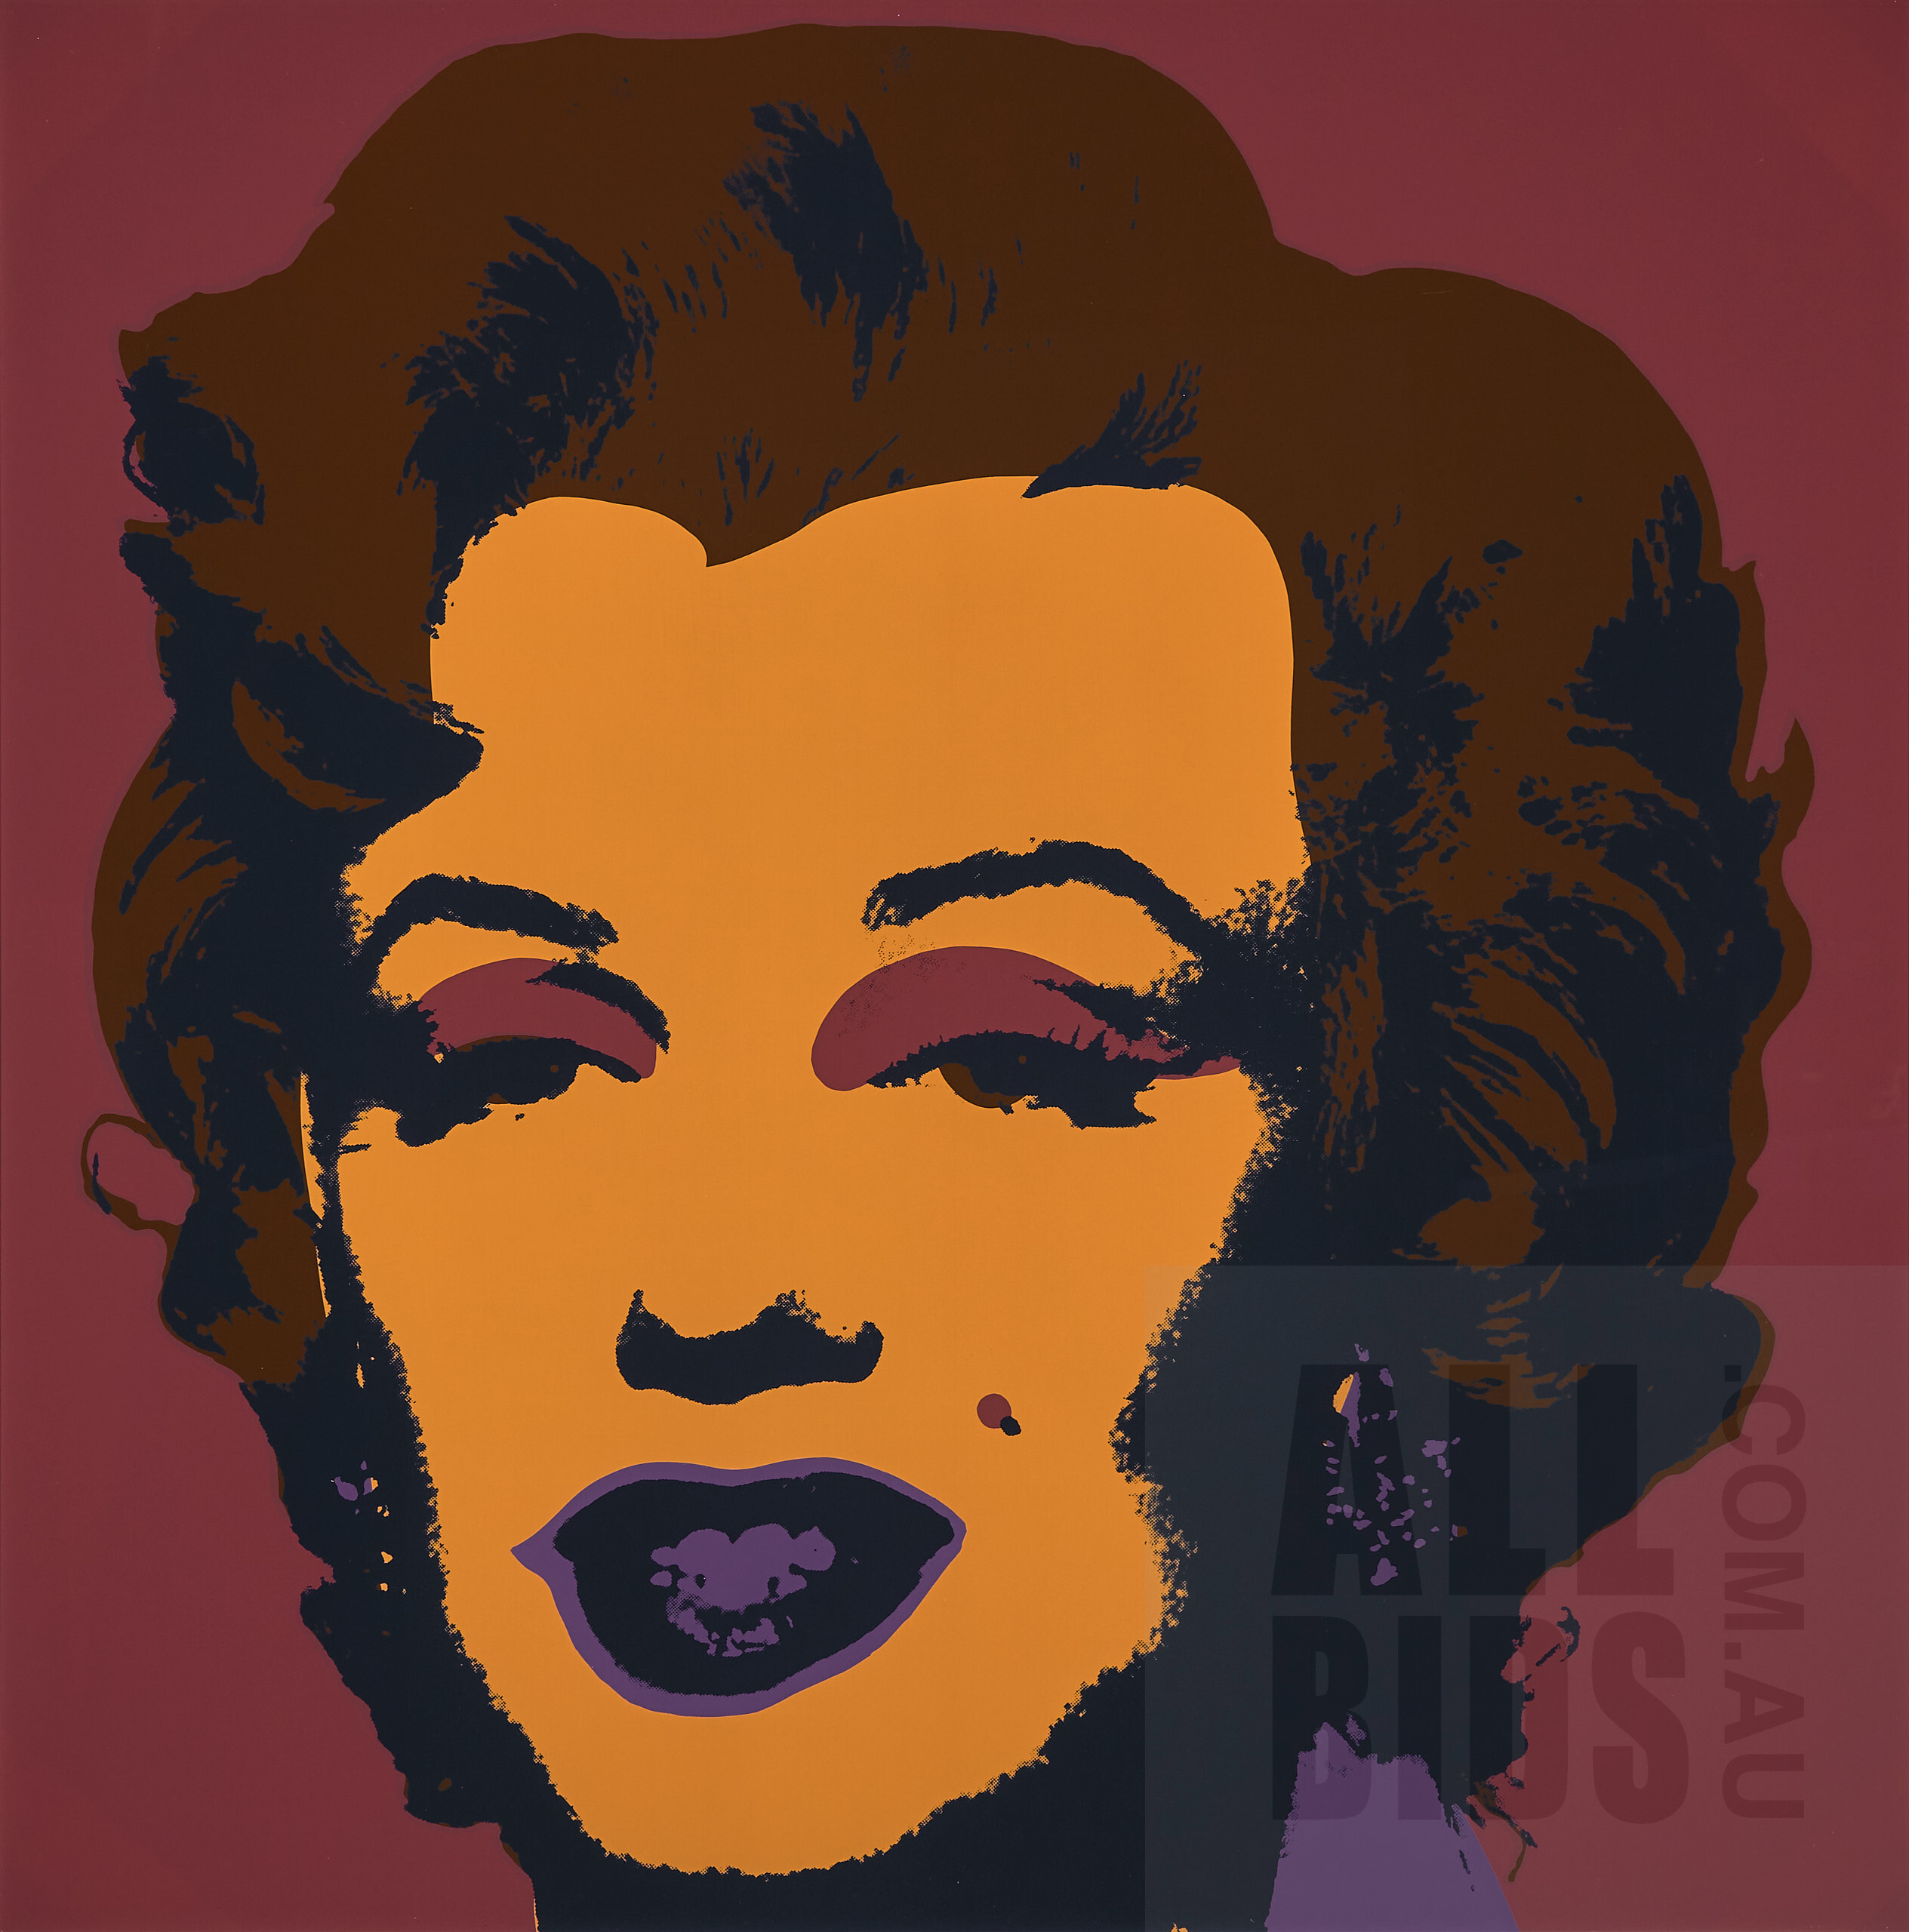 'Andy Warhol (1928 - 1987), Marilyn, Screenprint on Museum Board (published by Sunday B. Morning), 91 x 91 cm'